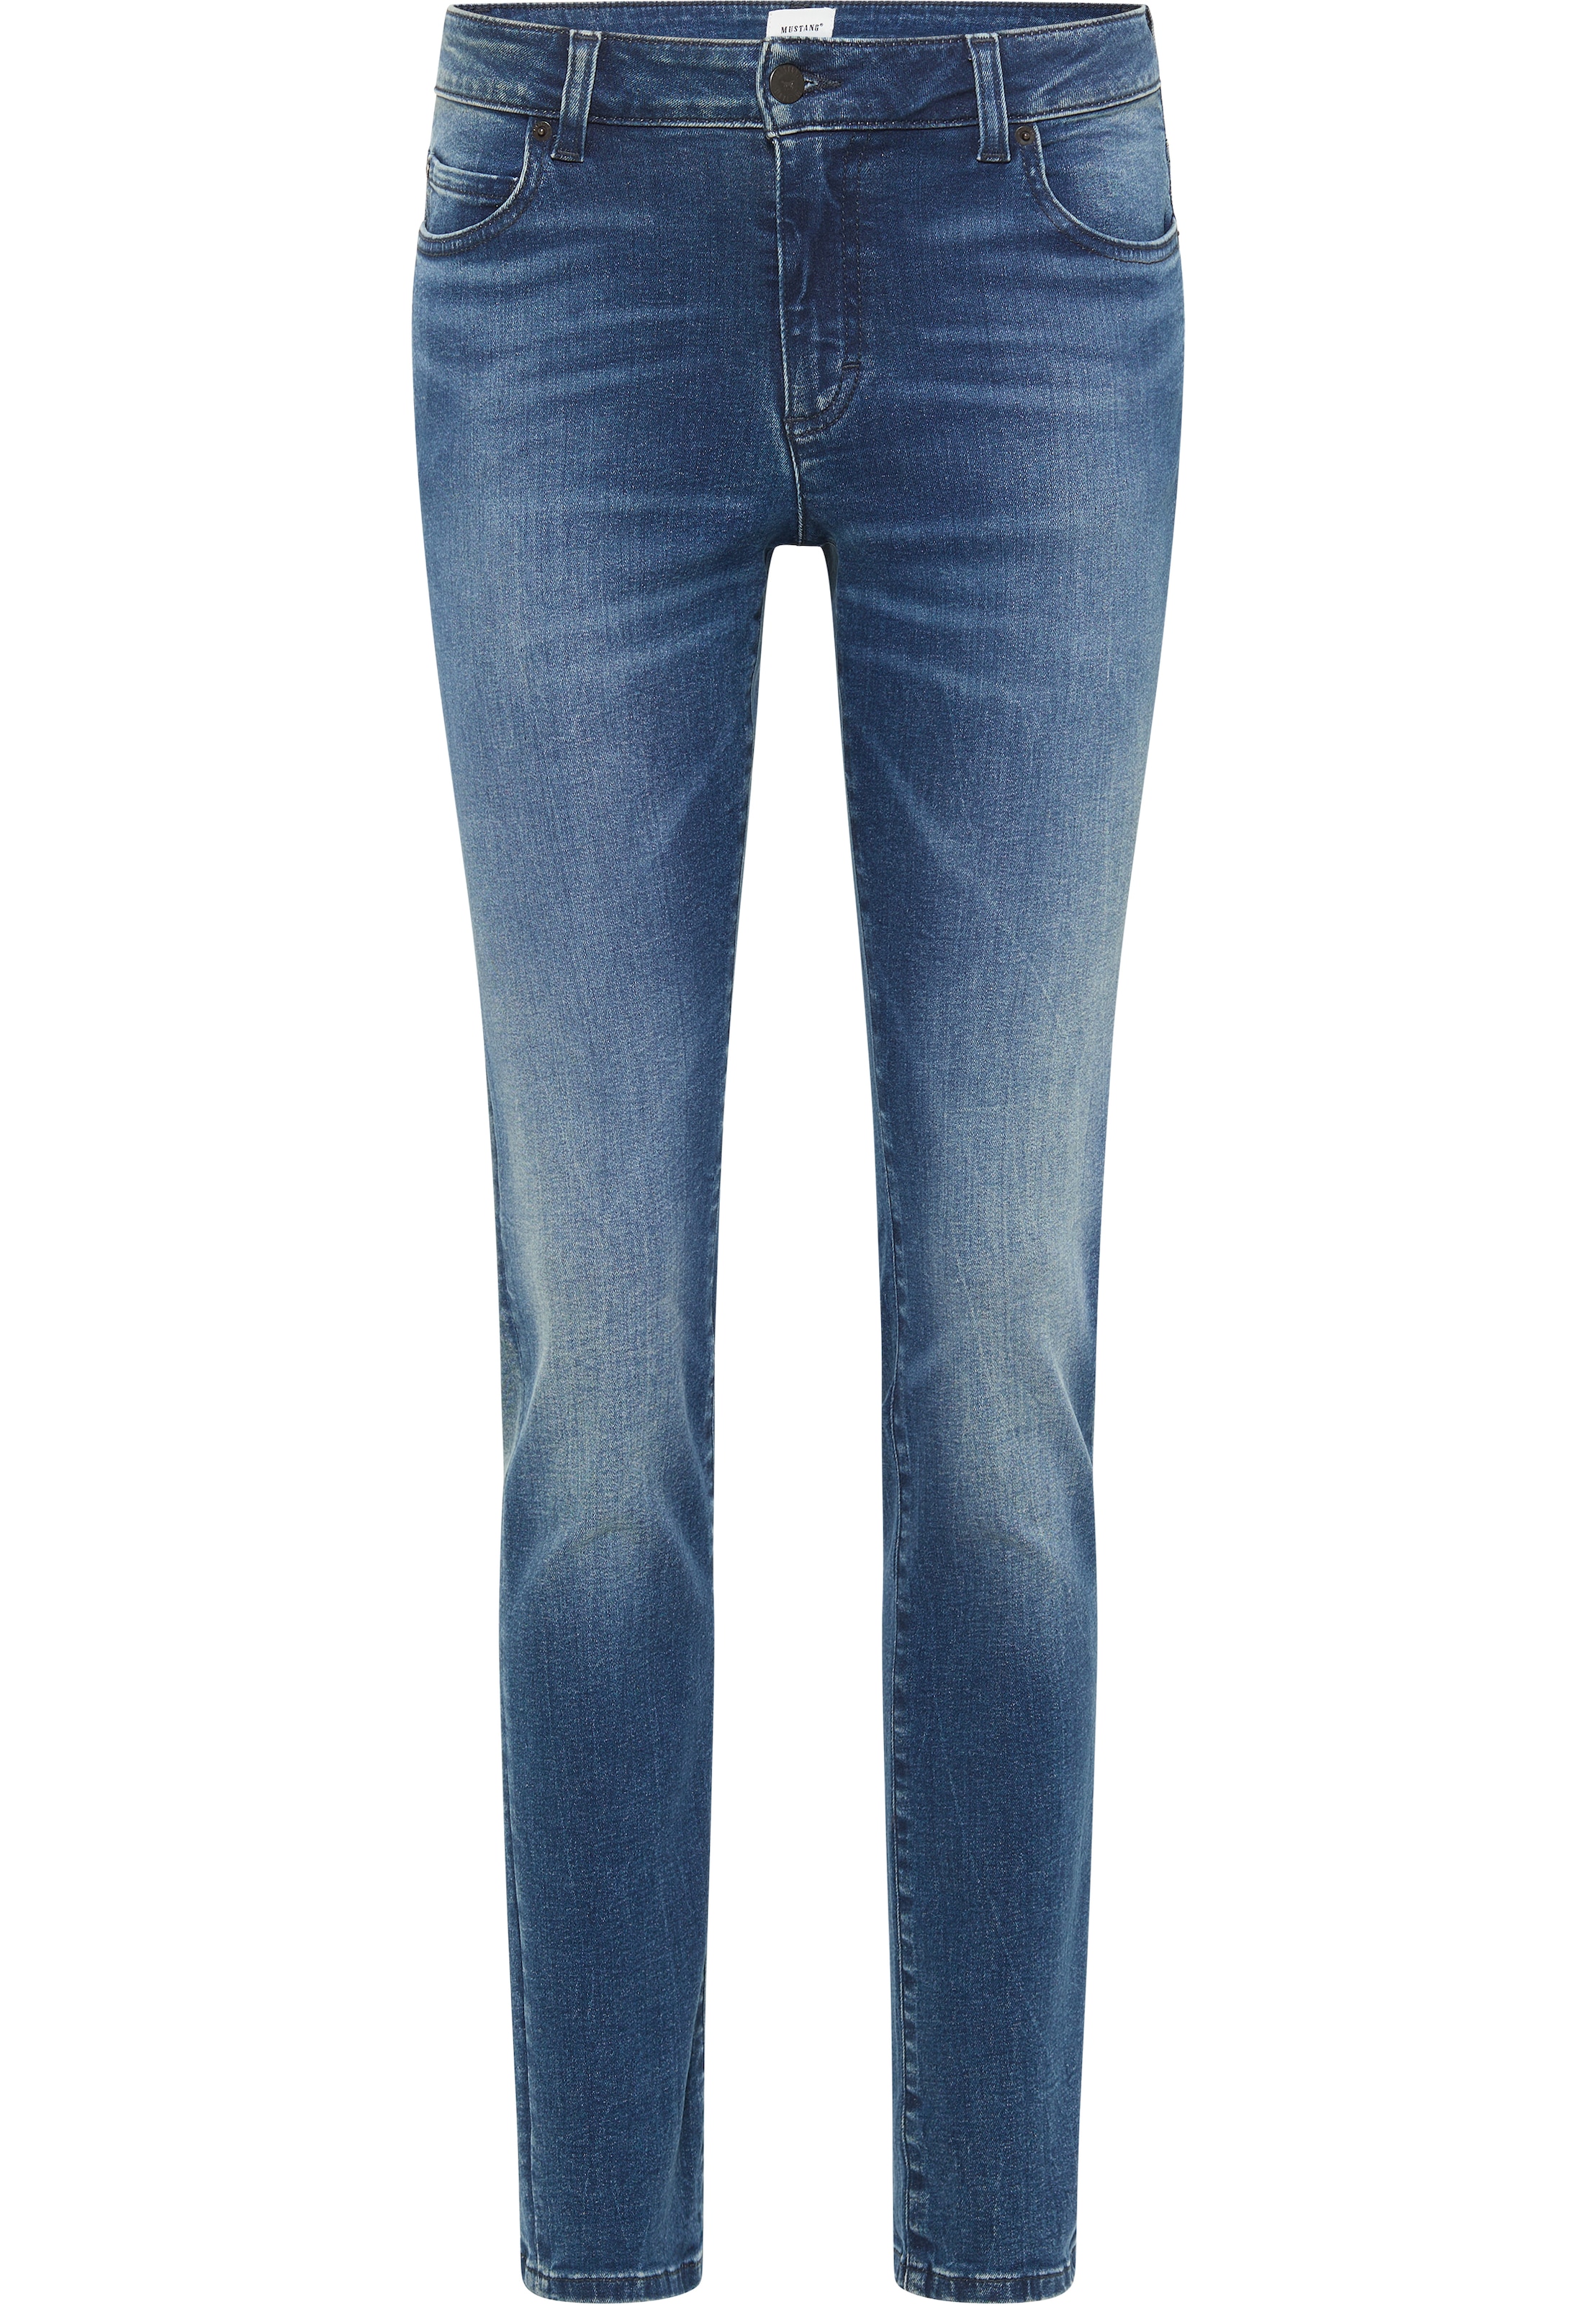 MUSTANG Slim-fit-Jeans »Style Crosby Relaxed Slim« bei ♕